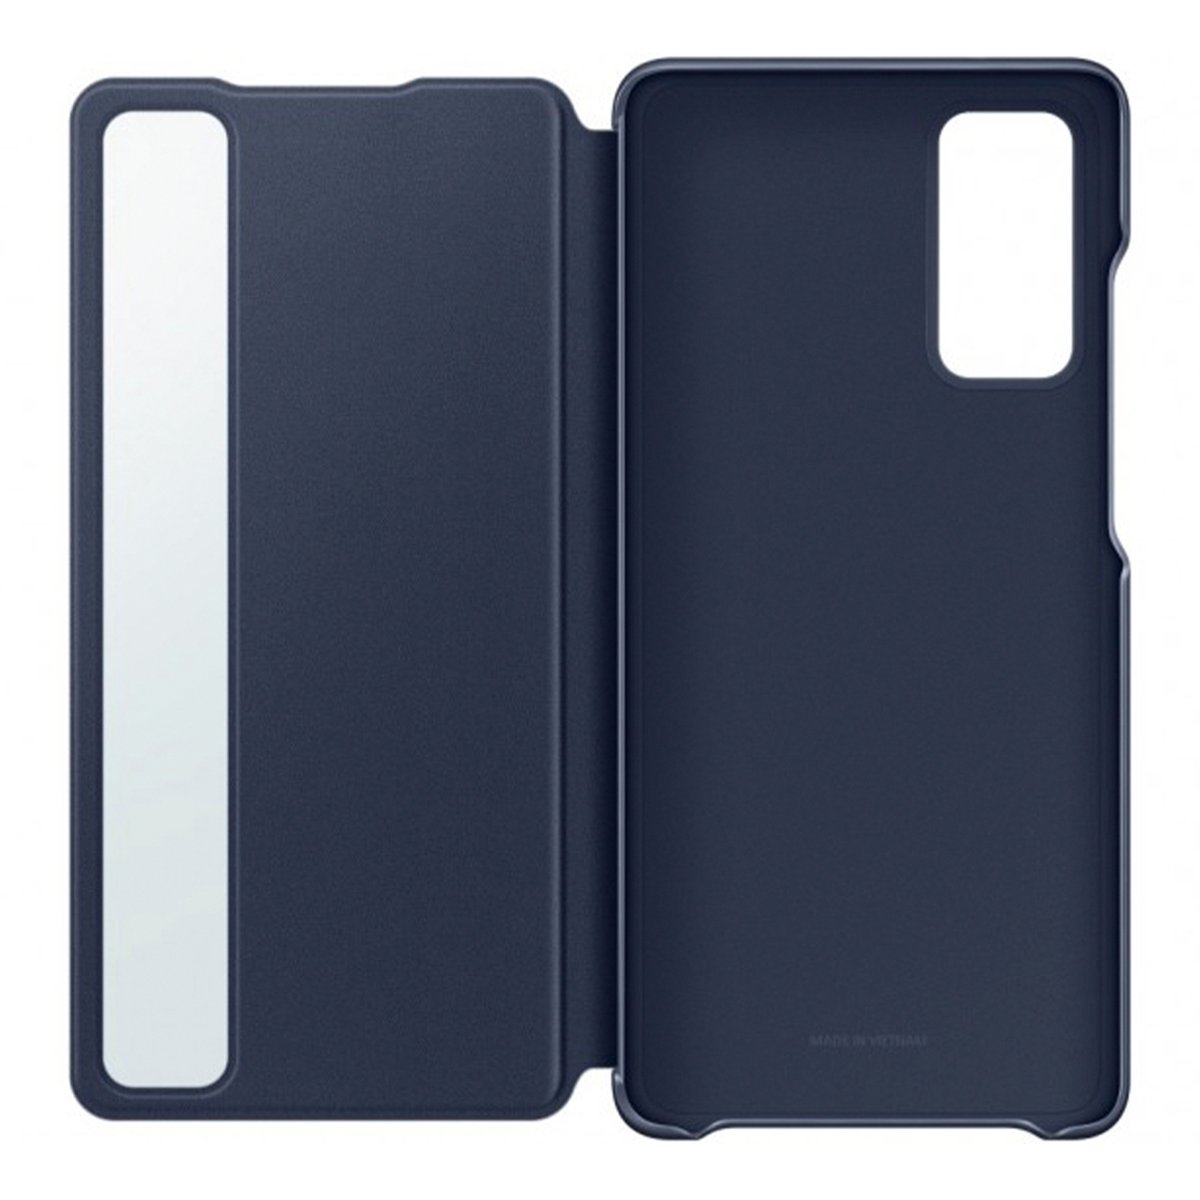 Samsung Galaxy S20FE Clear View Cover - Navy (ZG780CN)